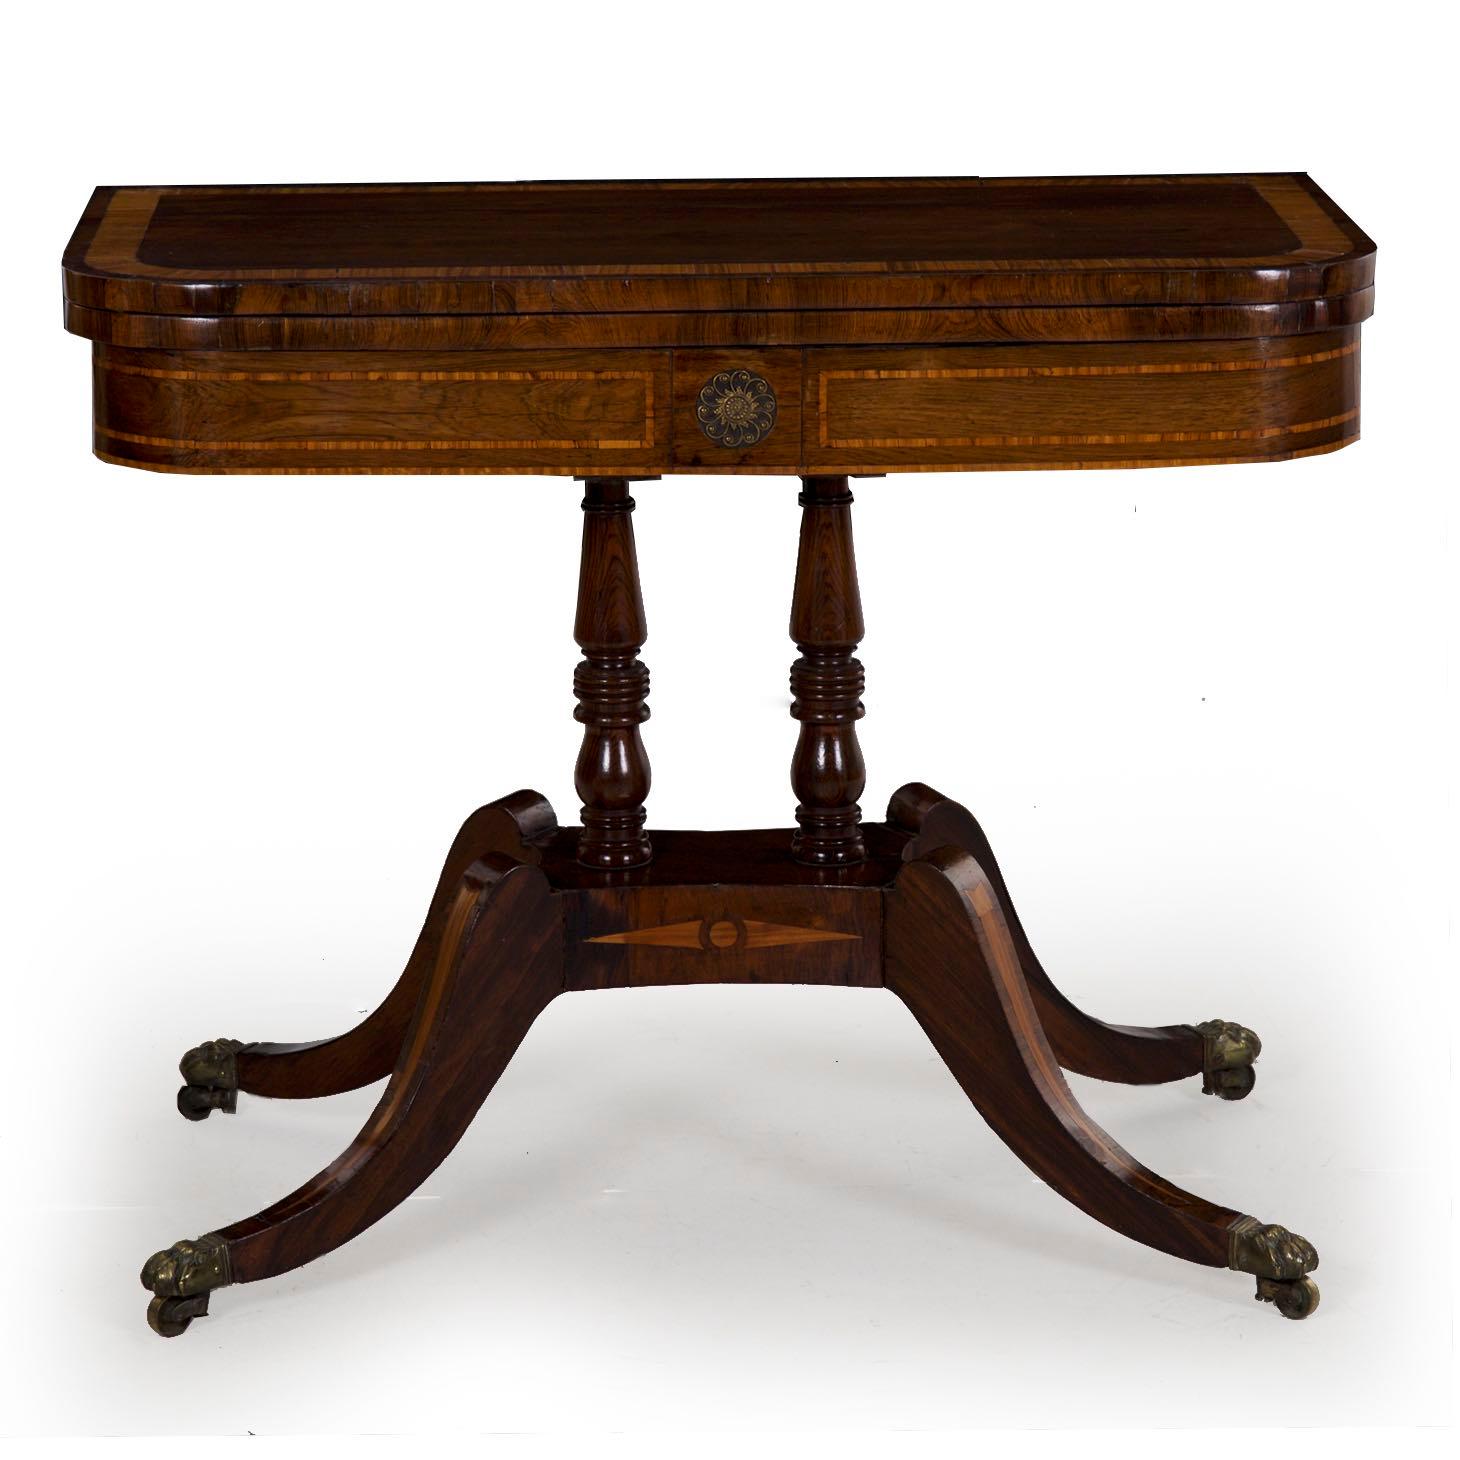 The careful use of the precious and now mostly extinct Brazilian Rosewood throughout all surfaces was a risky approach for the craftsman of this table, as the wood is fragile and difficult to work into curves. It is also exceedingly difficult to